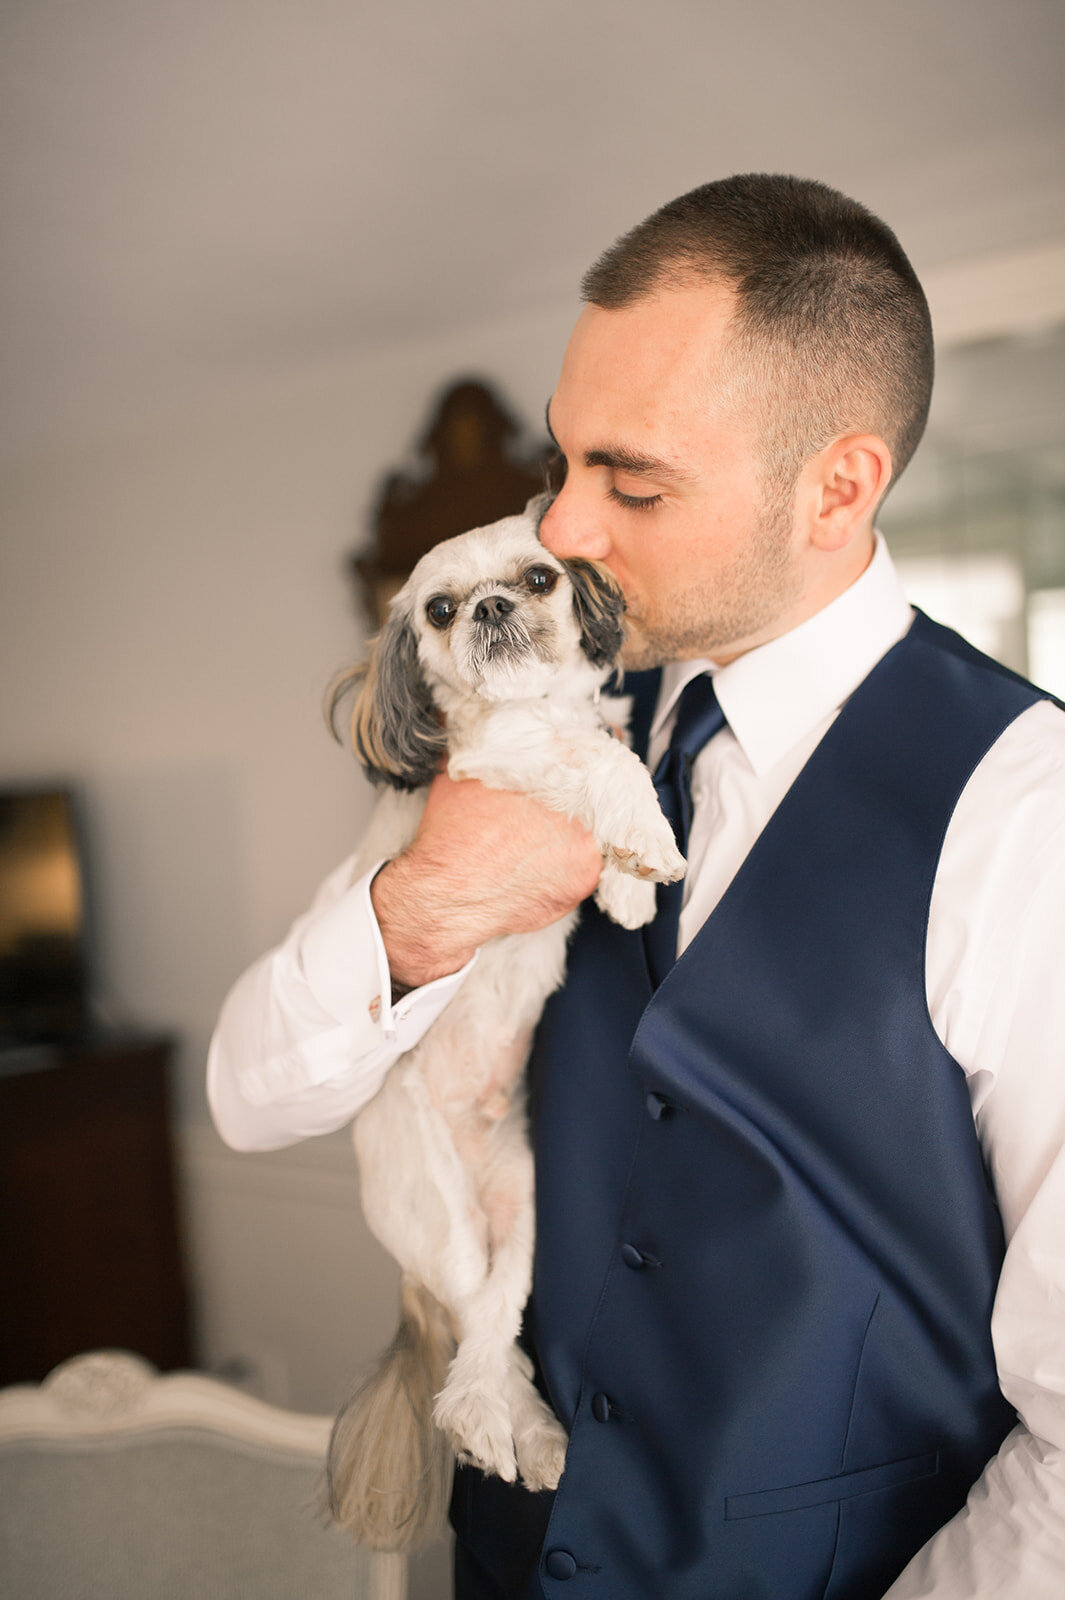 groom-and-pet-wedding-stella-blue-photography